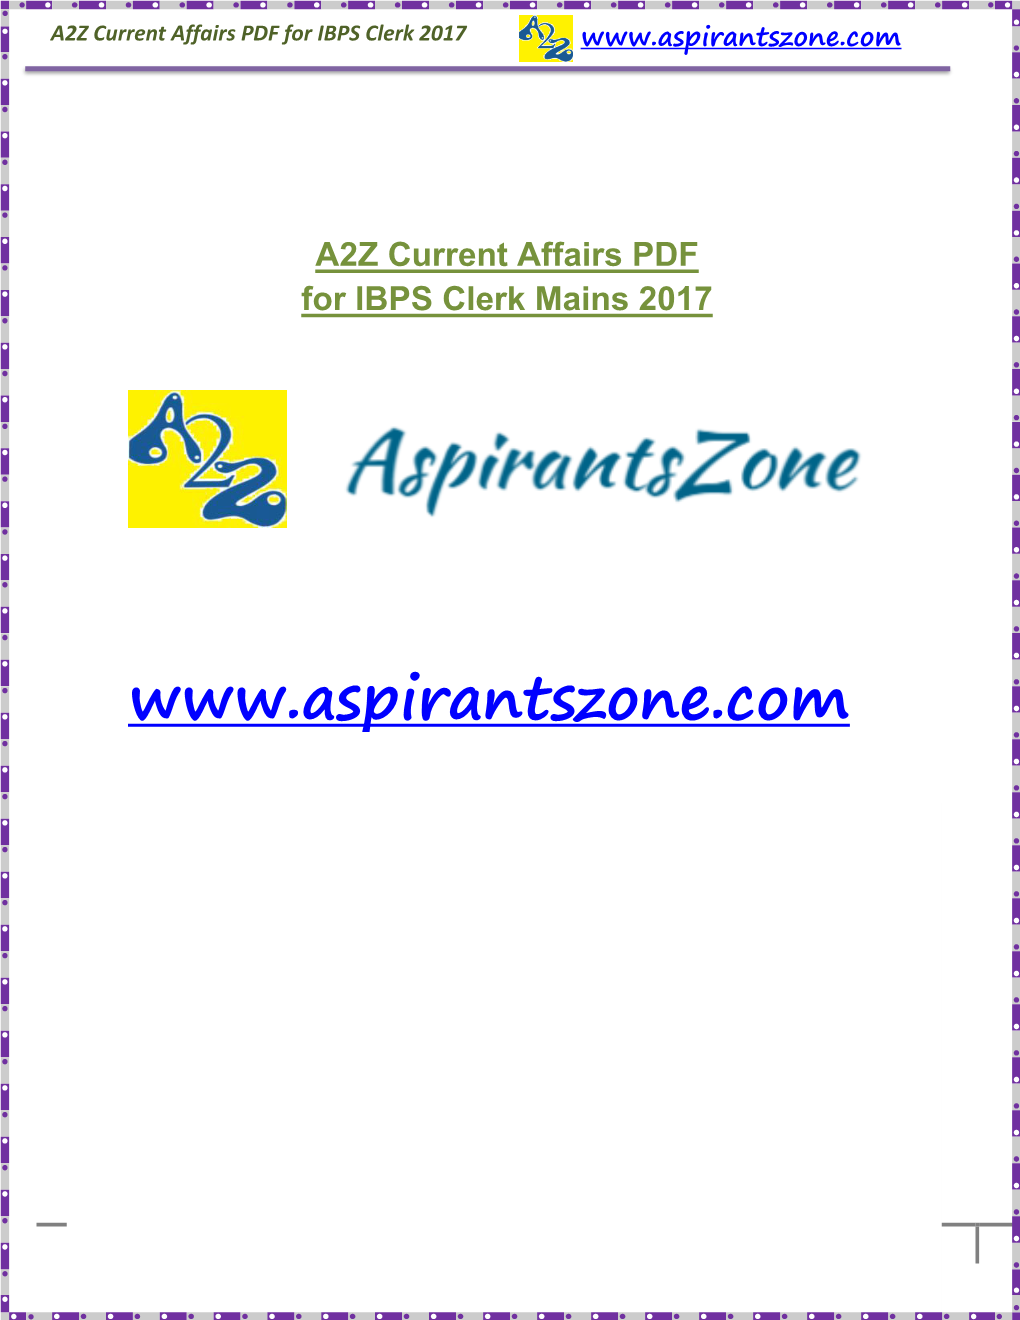 A2Z Current Affairs PDF for IBPS Clerk Mains 2017